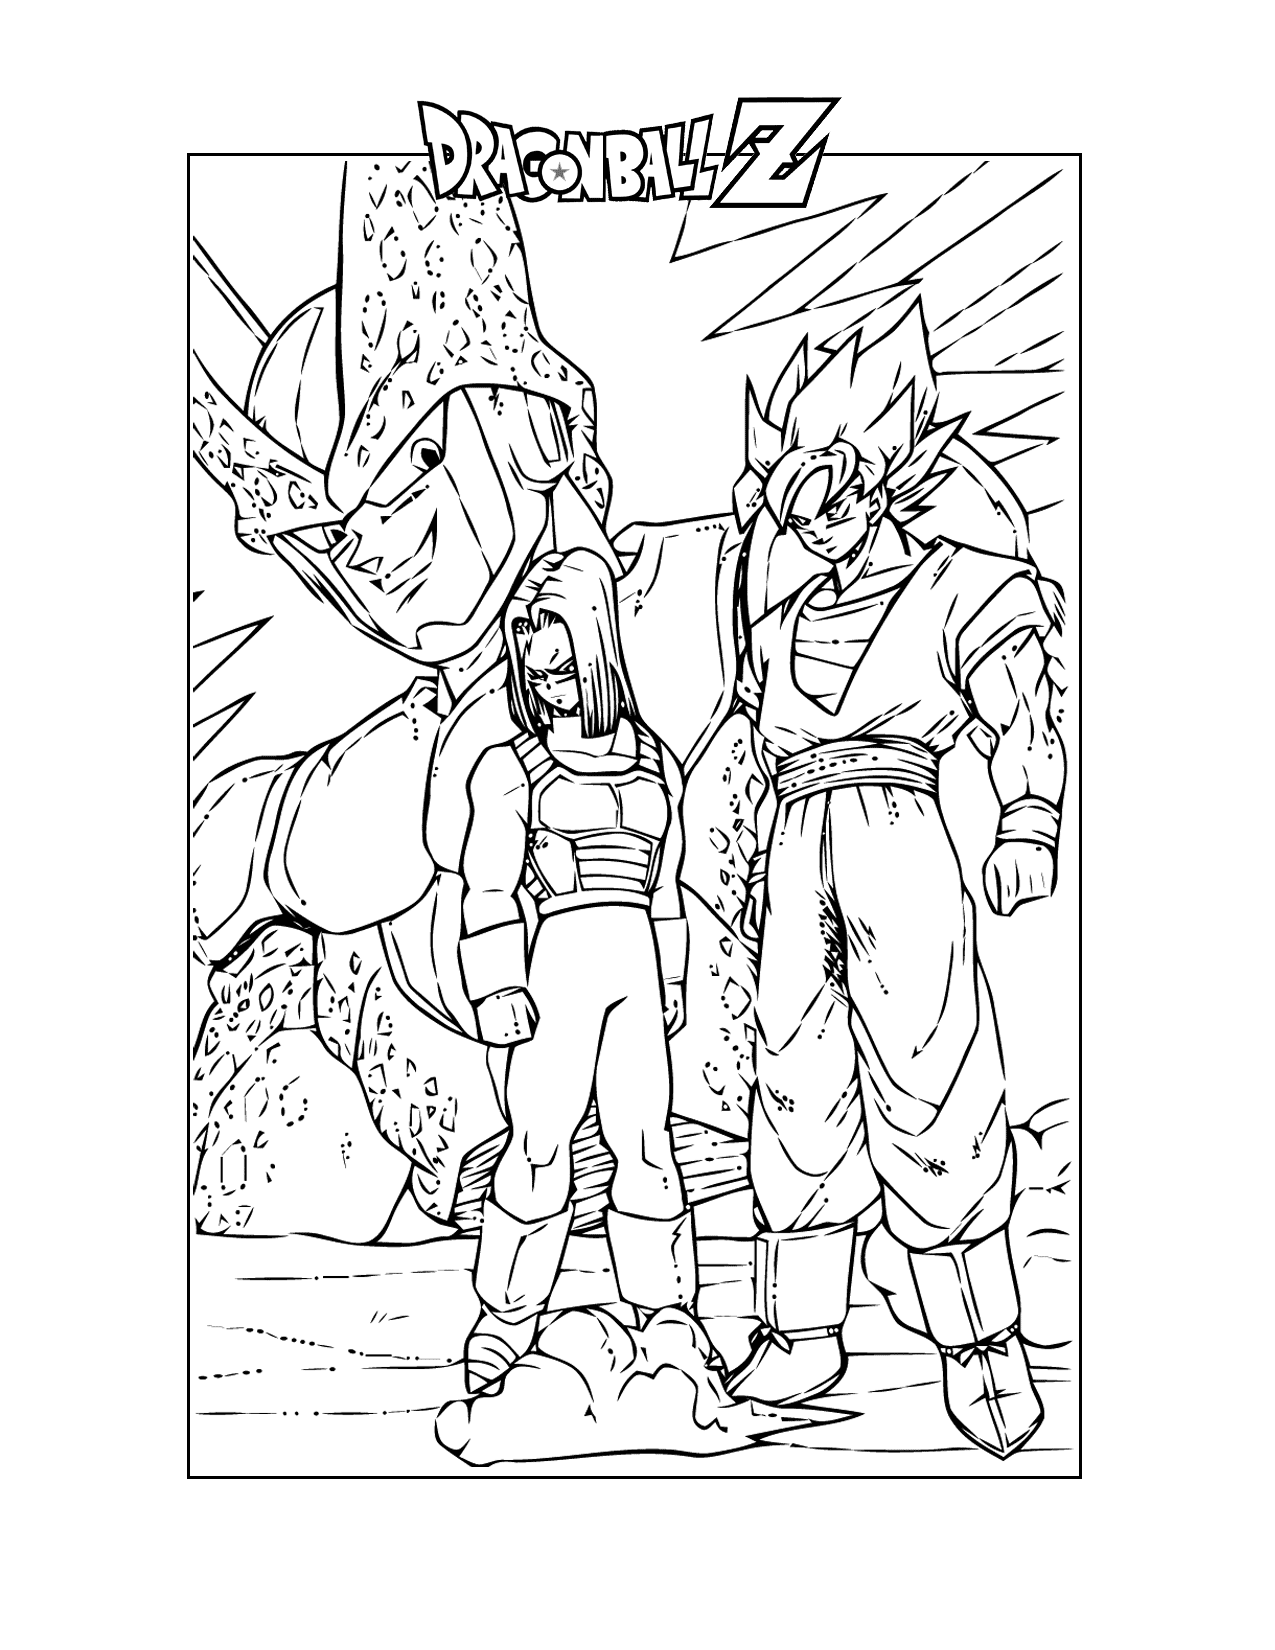 Goku Trunks And Cell Dragonball Z Coloring Page